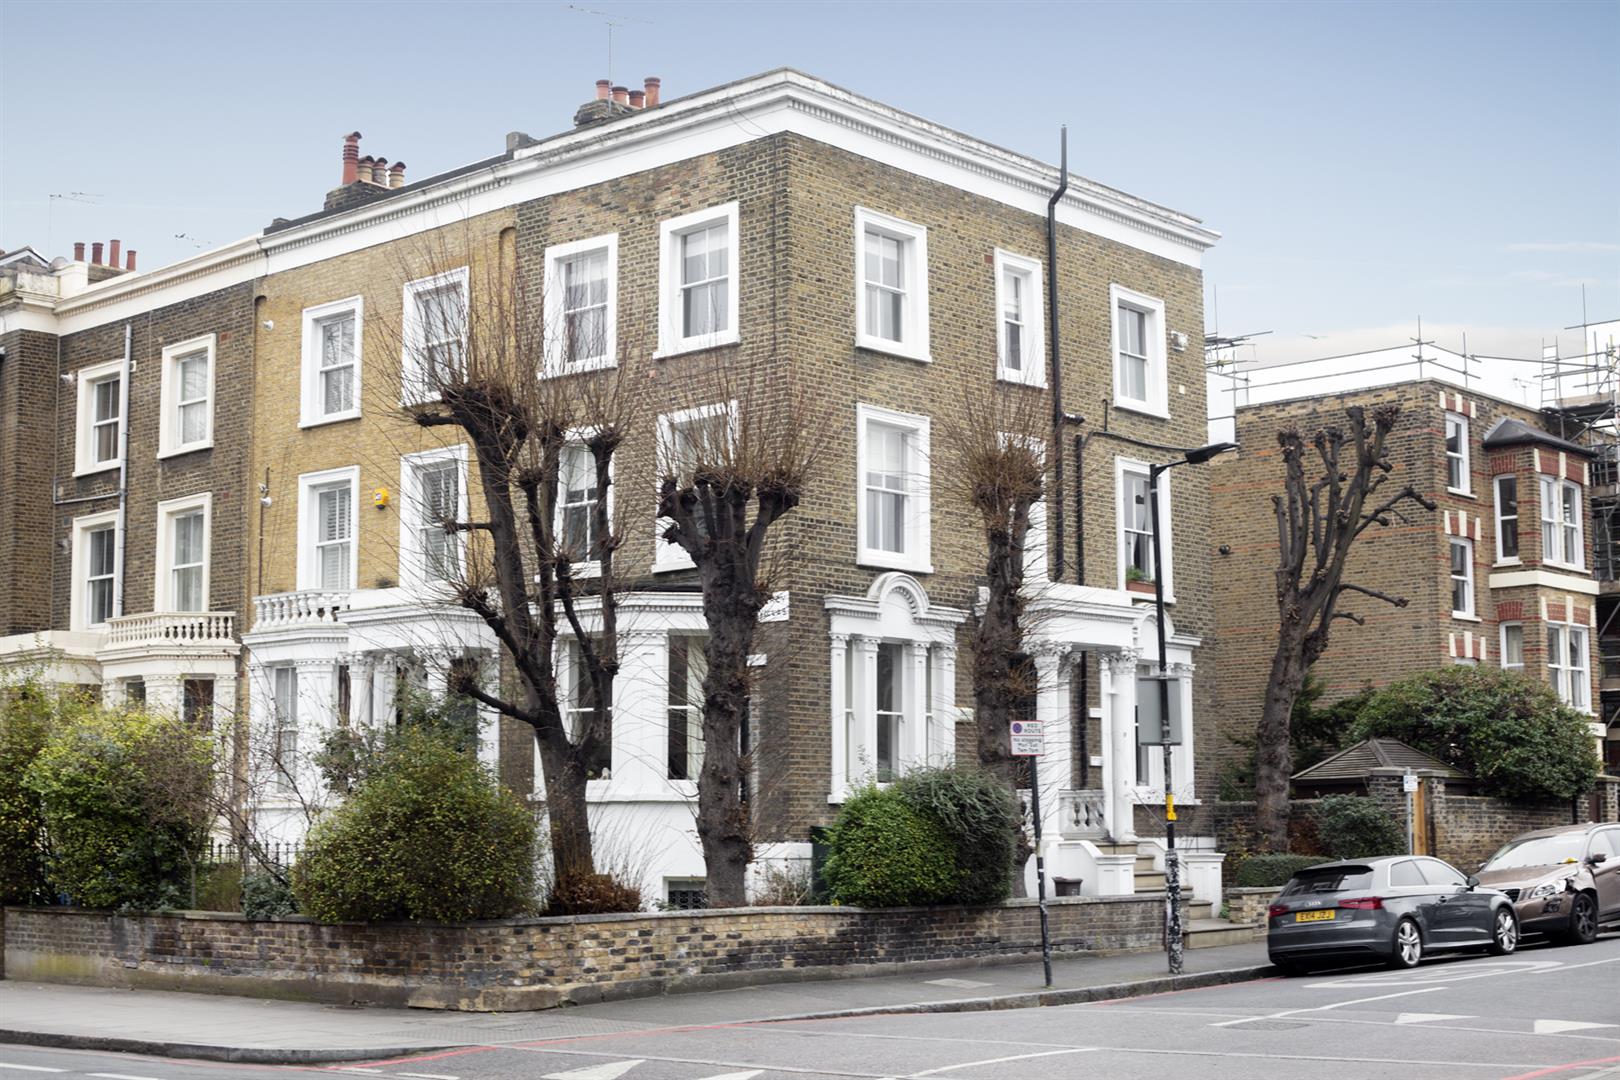 Flat - Conversion Sold in Peckham Road, Camberwell, SE5 1049 view1